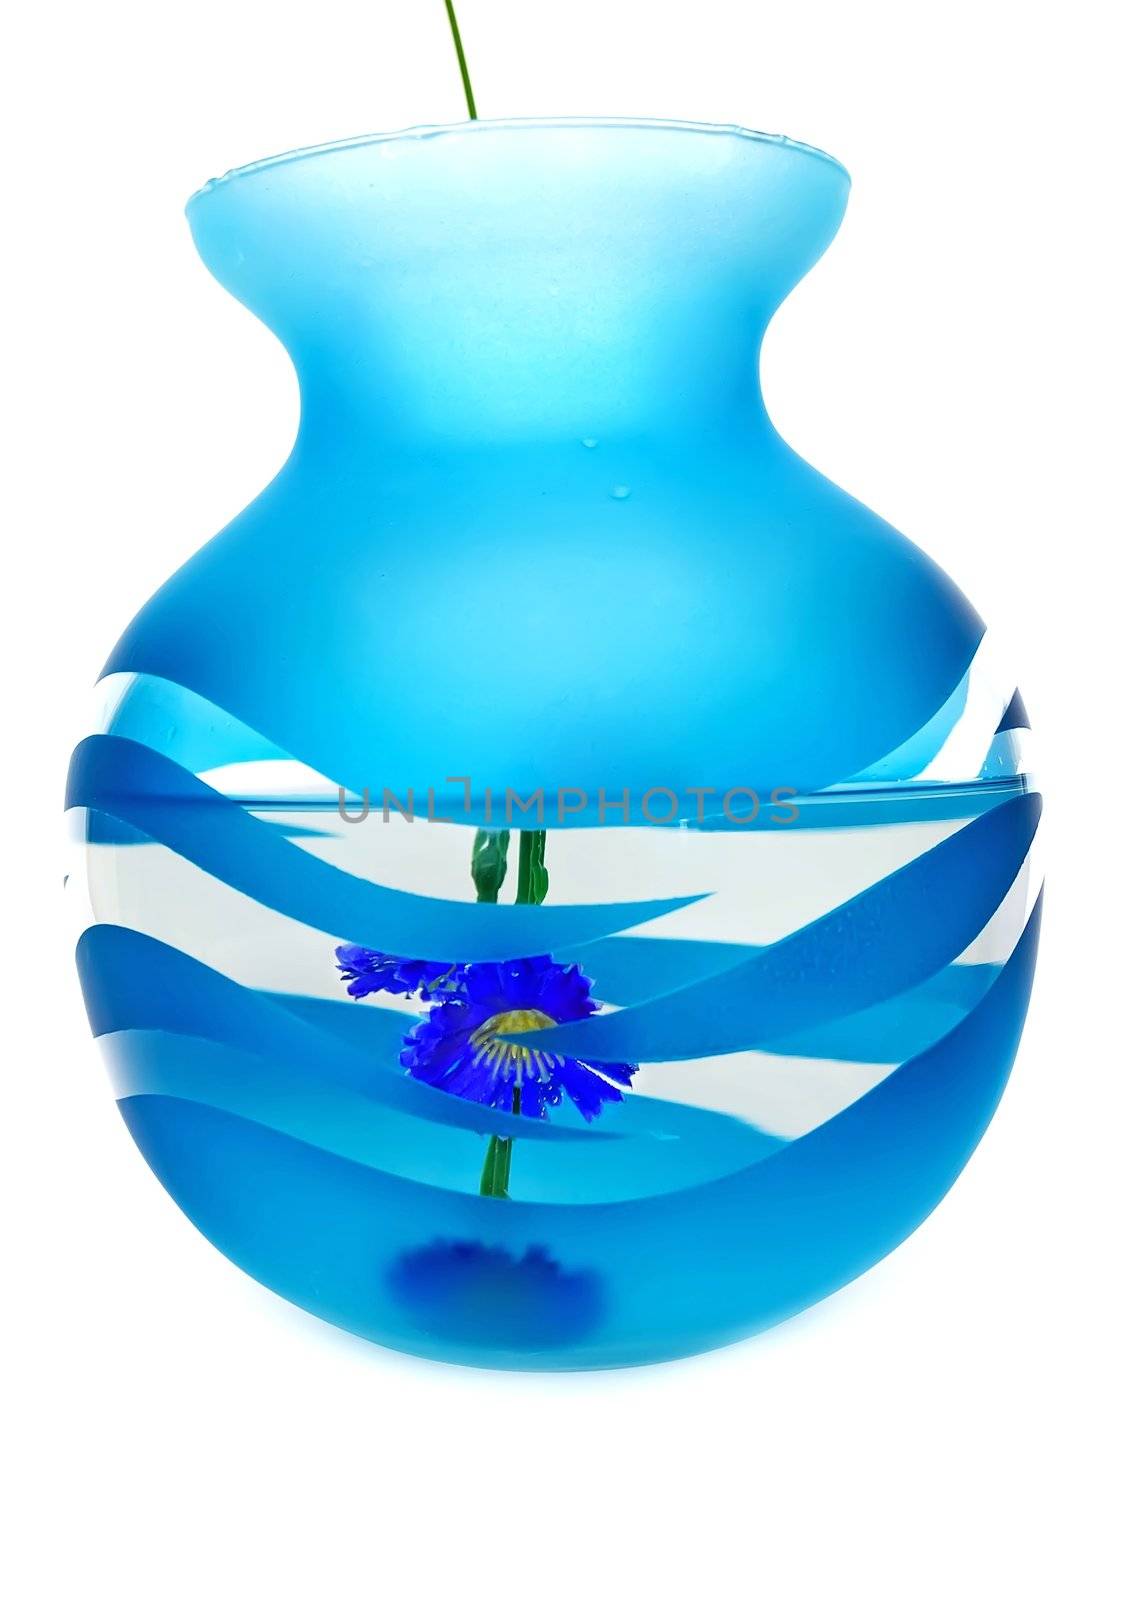 Blue flower dipped in a blue vase on a white background.